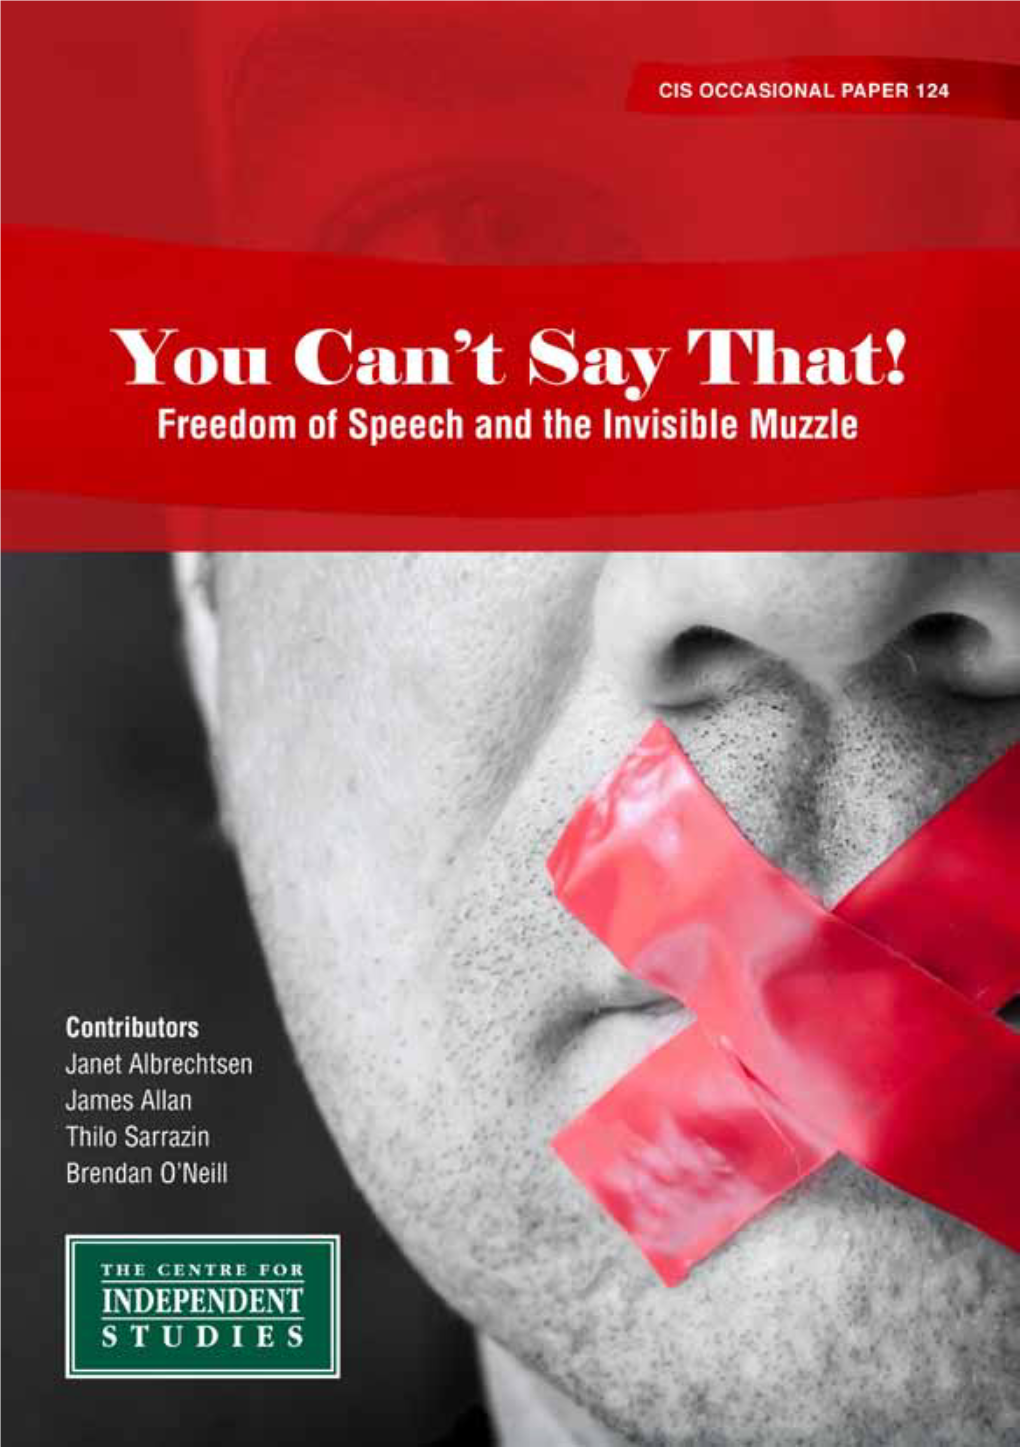 Freedom of Speech and the Invisible Muzzle